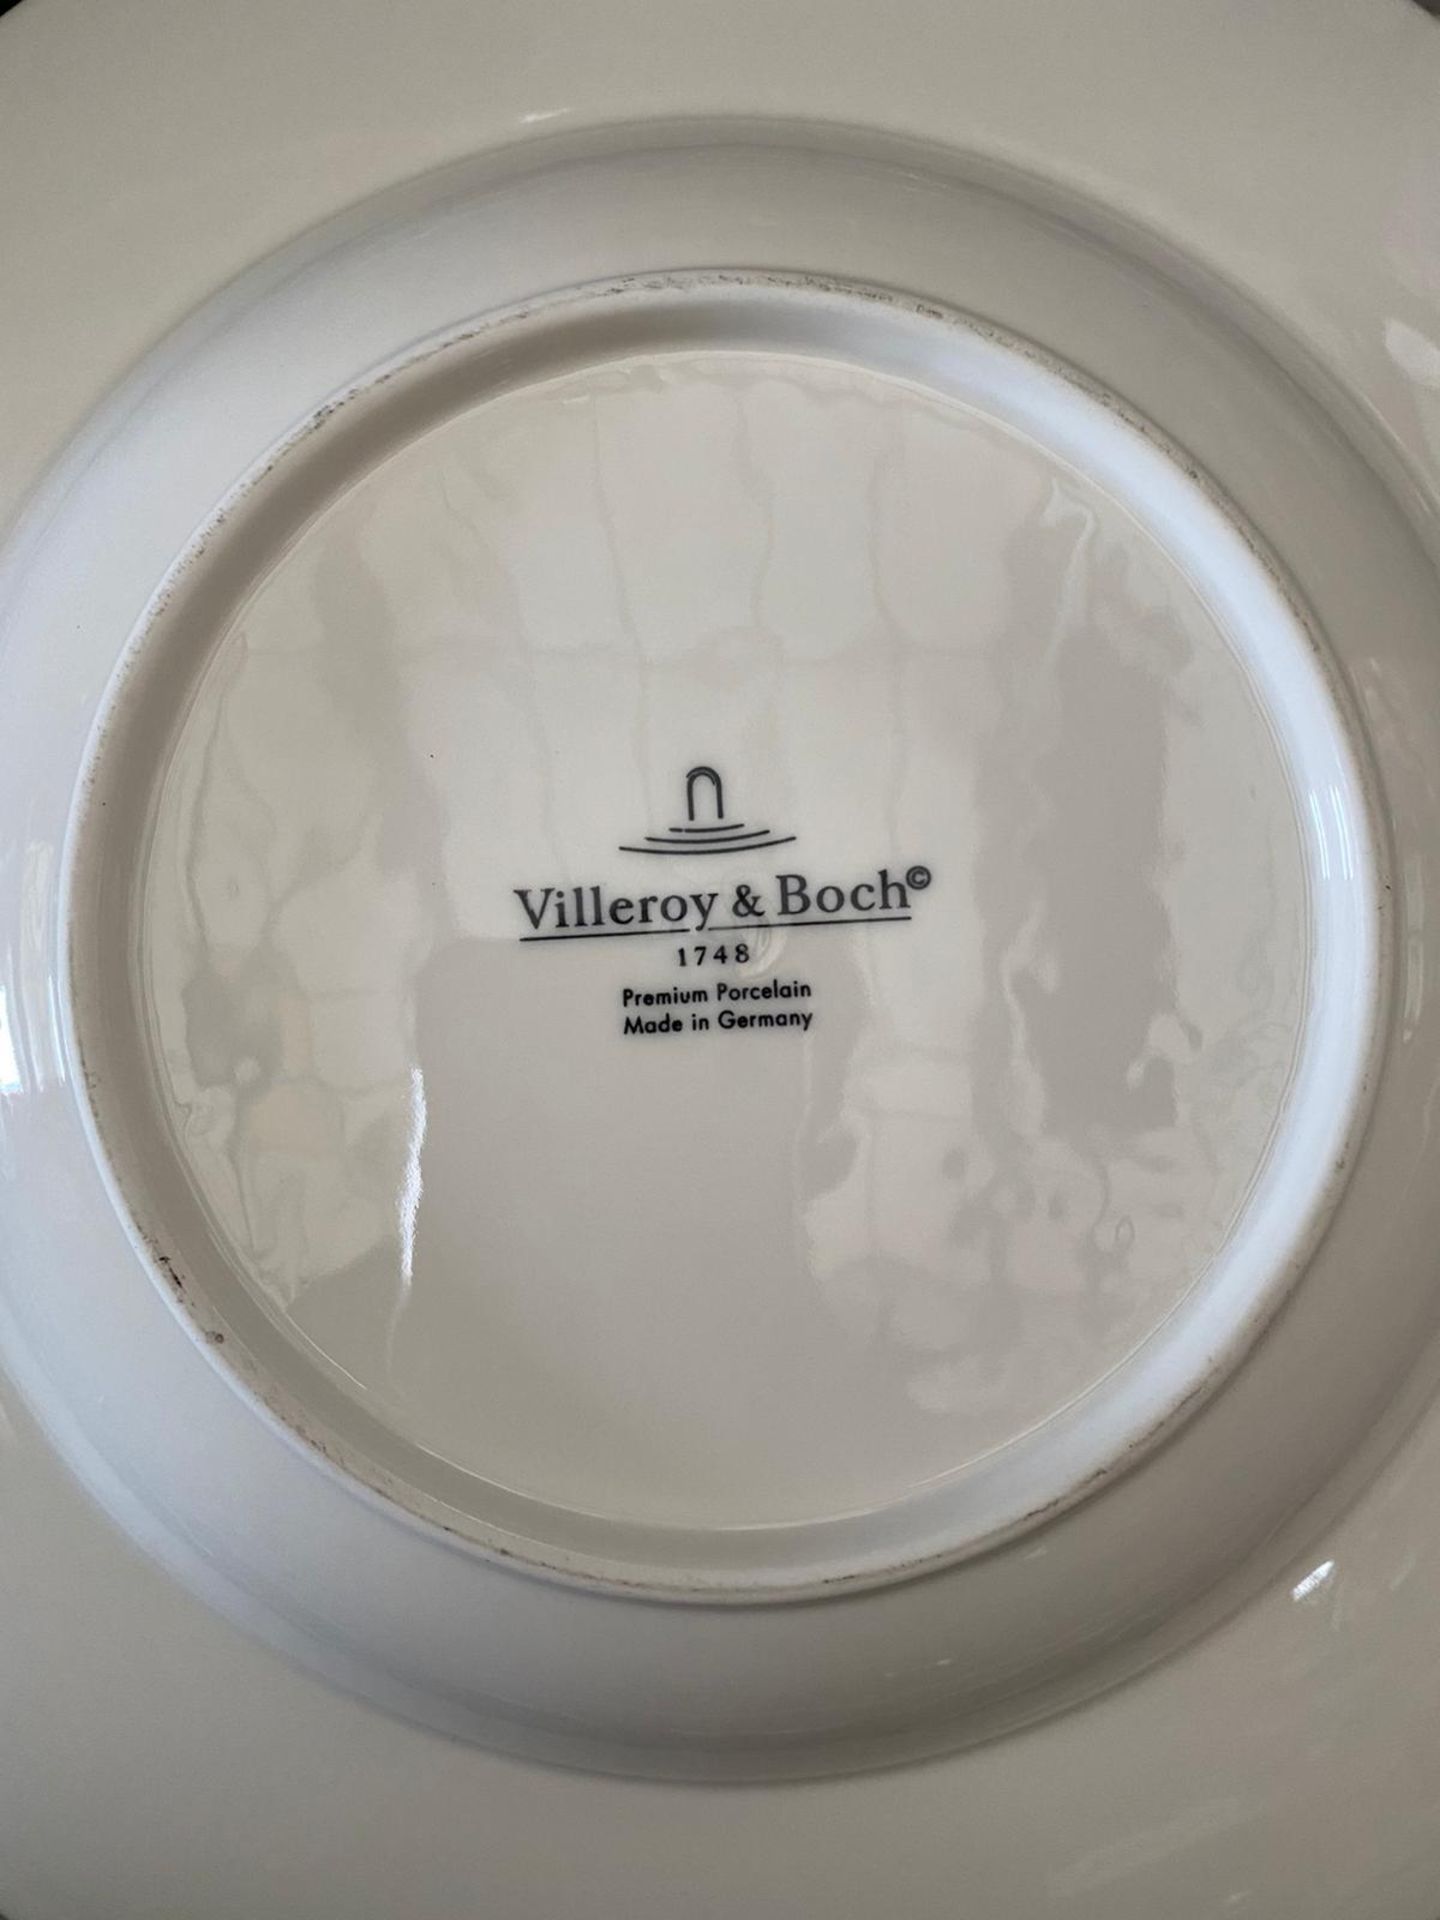 6 x Villeroy & Boch Royal Dinner Plate - 290mm (29cm)- Ref: 1044122620 -New and Boxed - RRP: £125 - Image 2 of 5